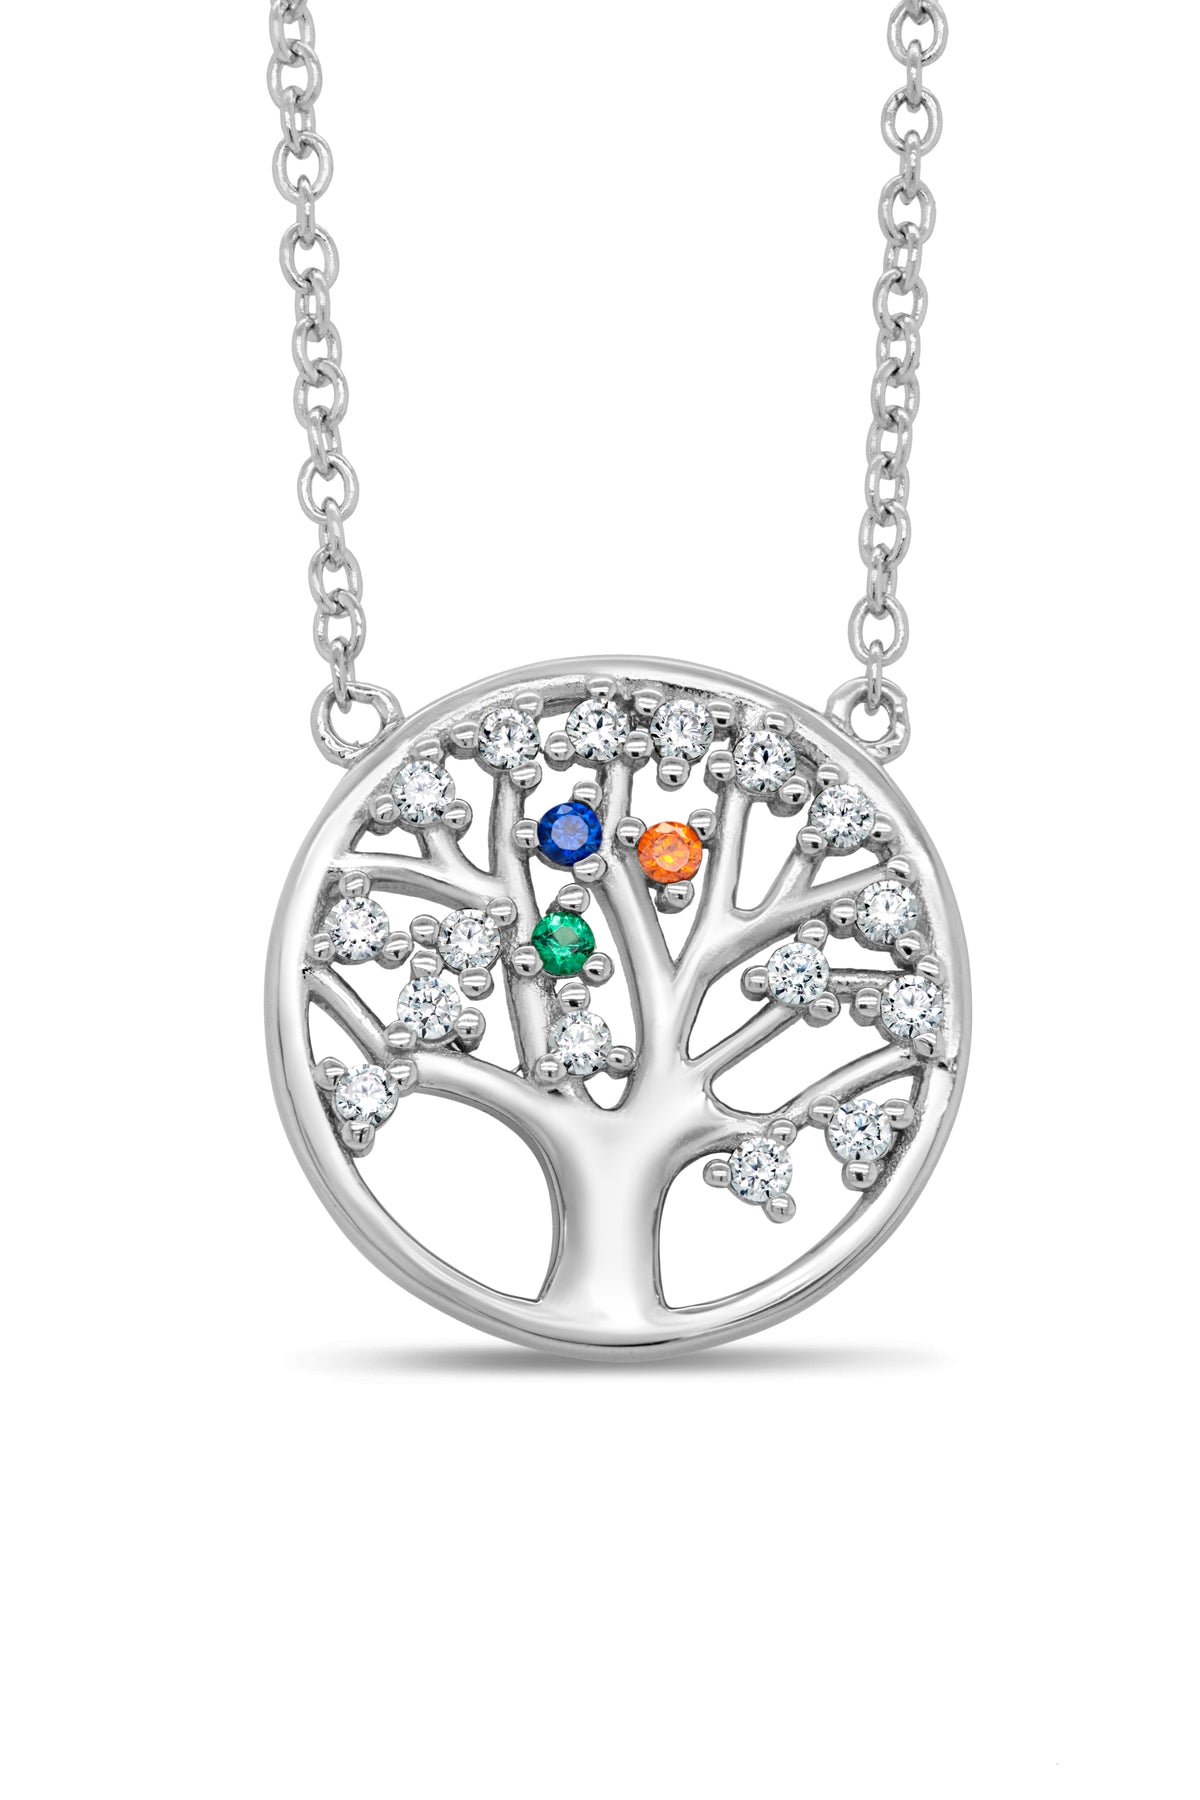 Tree of Life Birthstone Necklace for Mom [1-4 Names] | FARUZO